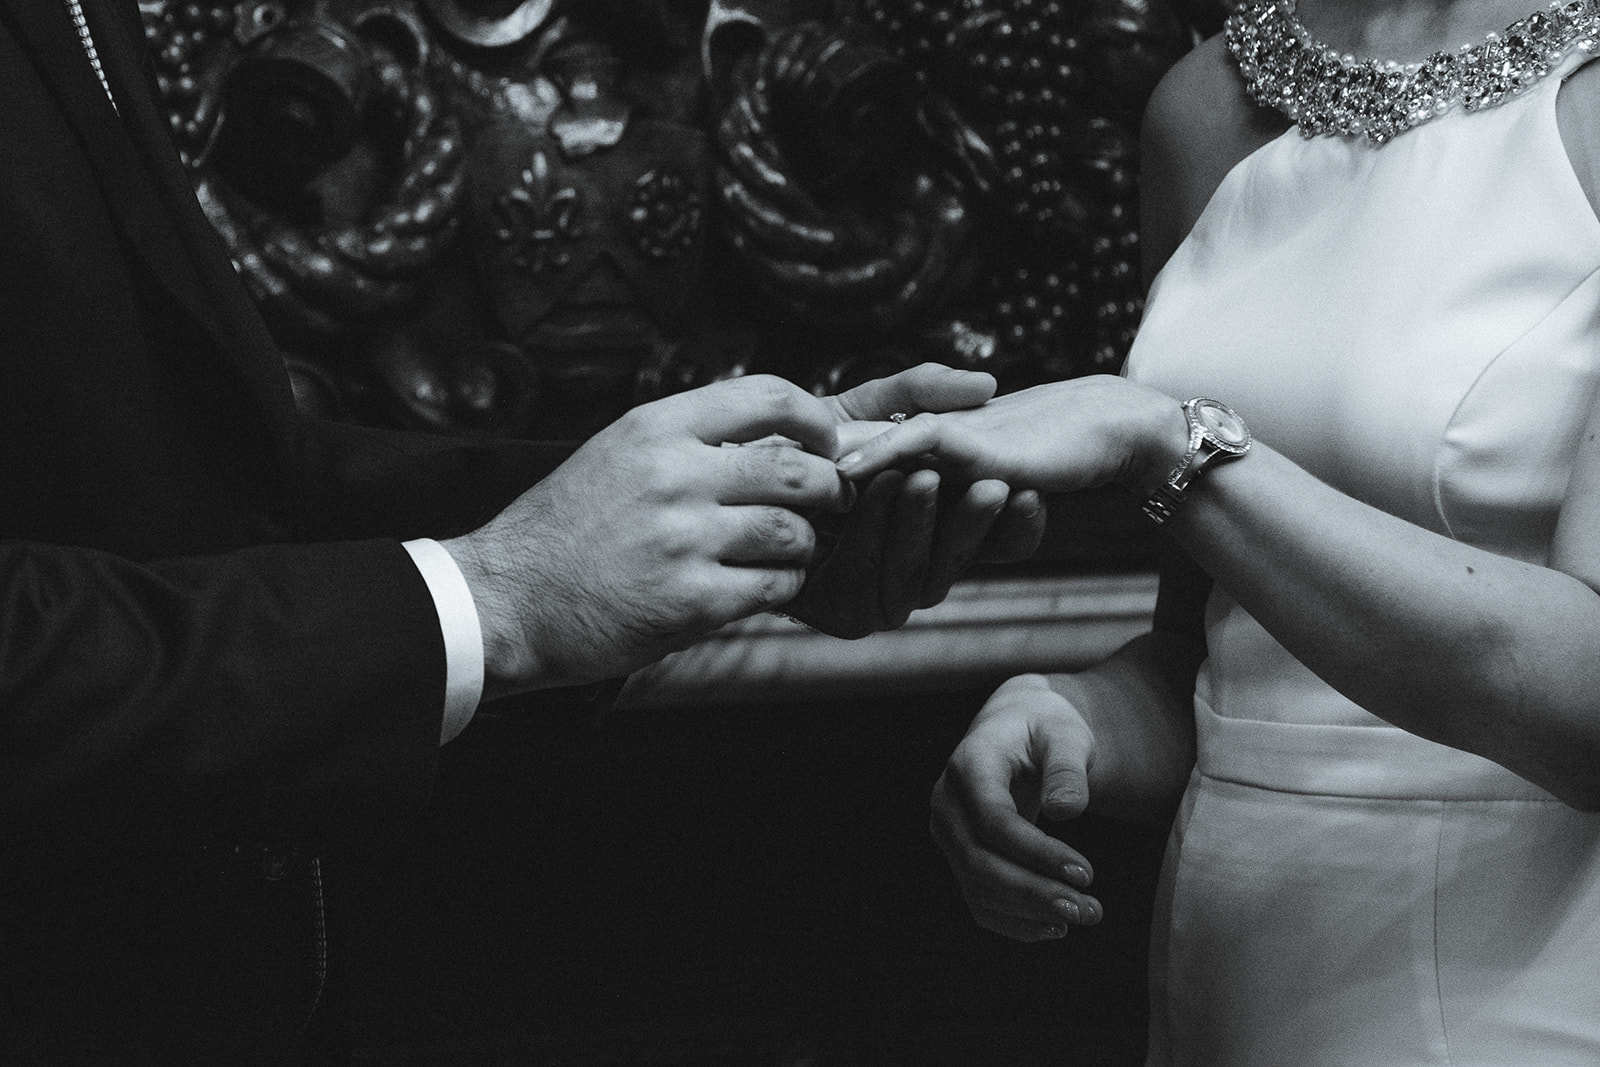 Kinga and Jean-Marc's ring exchange during the wedding ceremony in the Marylebone Room at The Old Marylebone Town Hall